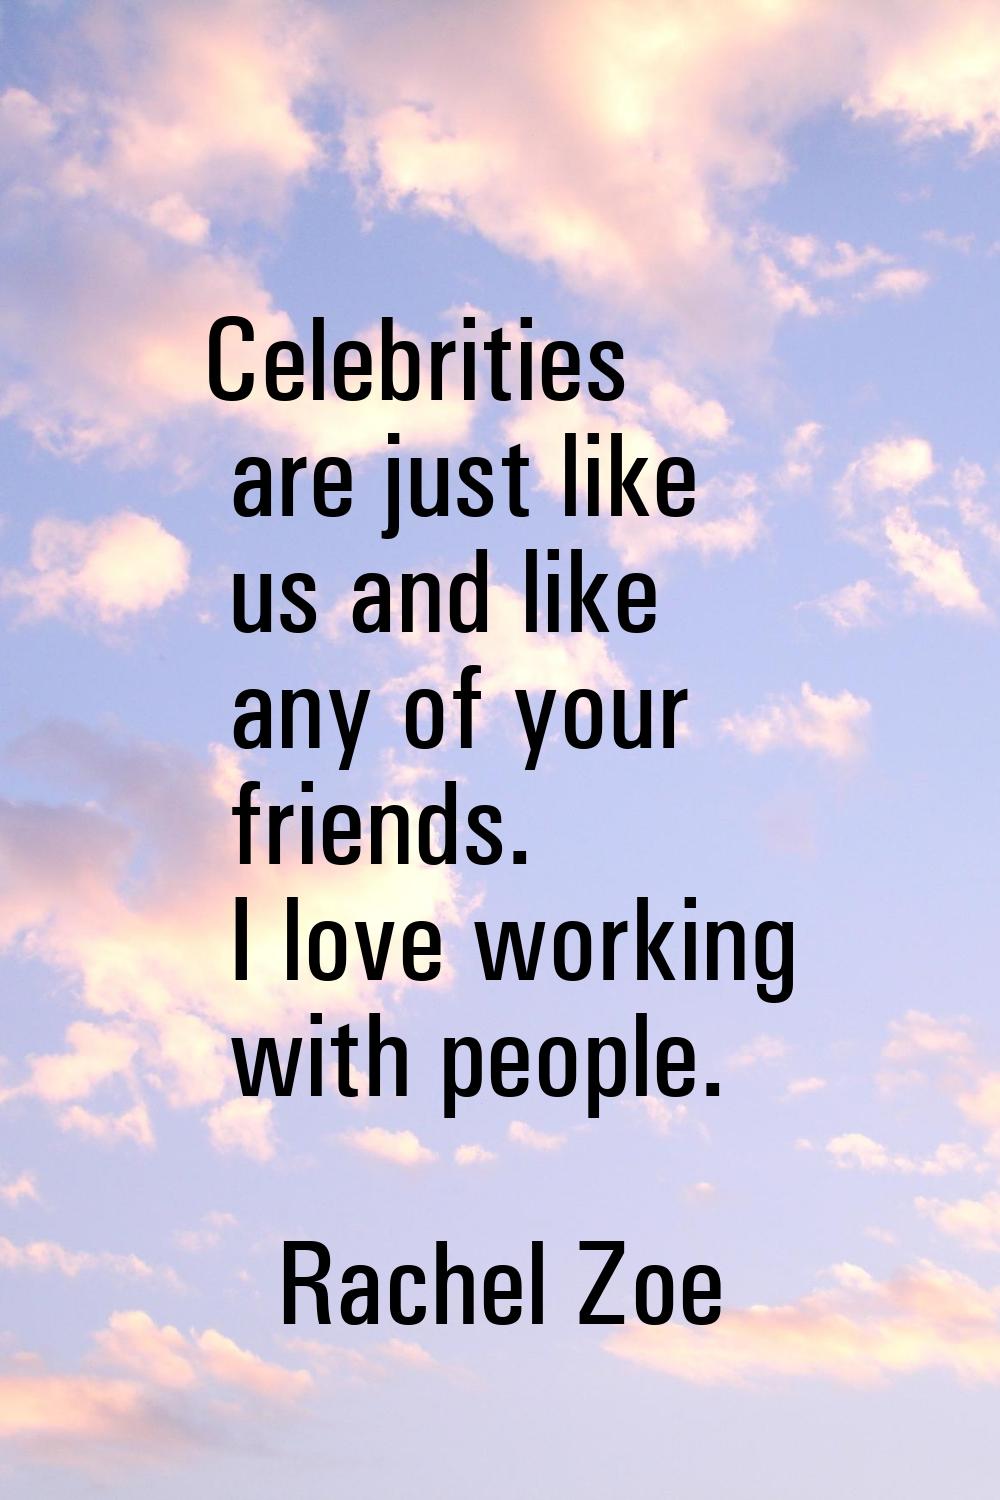 Celebrities are just like us and like any of your friends. I love working with people.